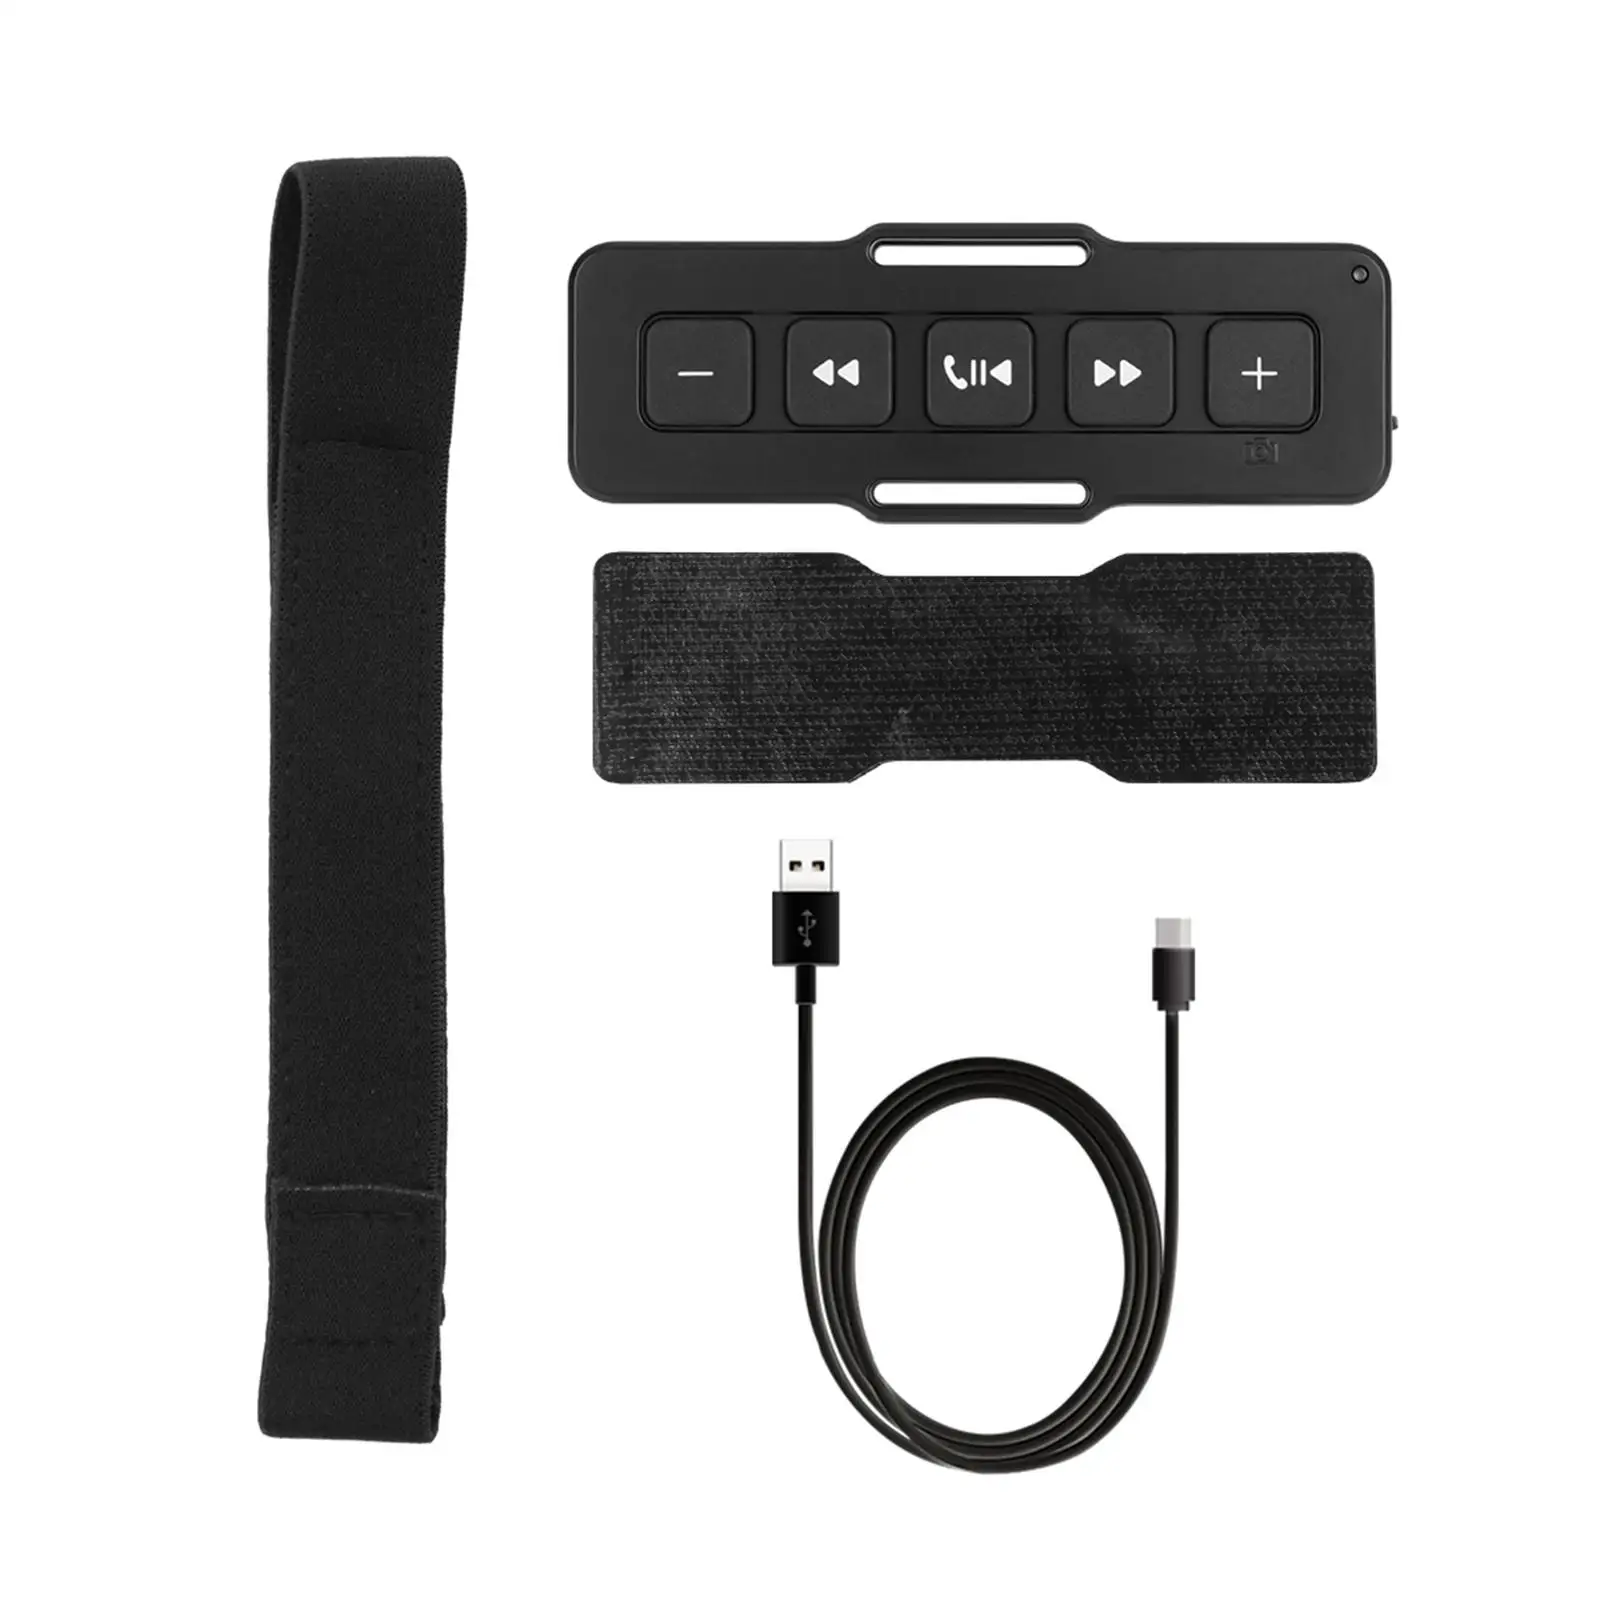 with Bandage Car Remote Controller 5 Button Waterproof Music Control USB Bike Handlebar Media Control for Outdoors Hiking